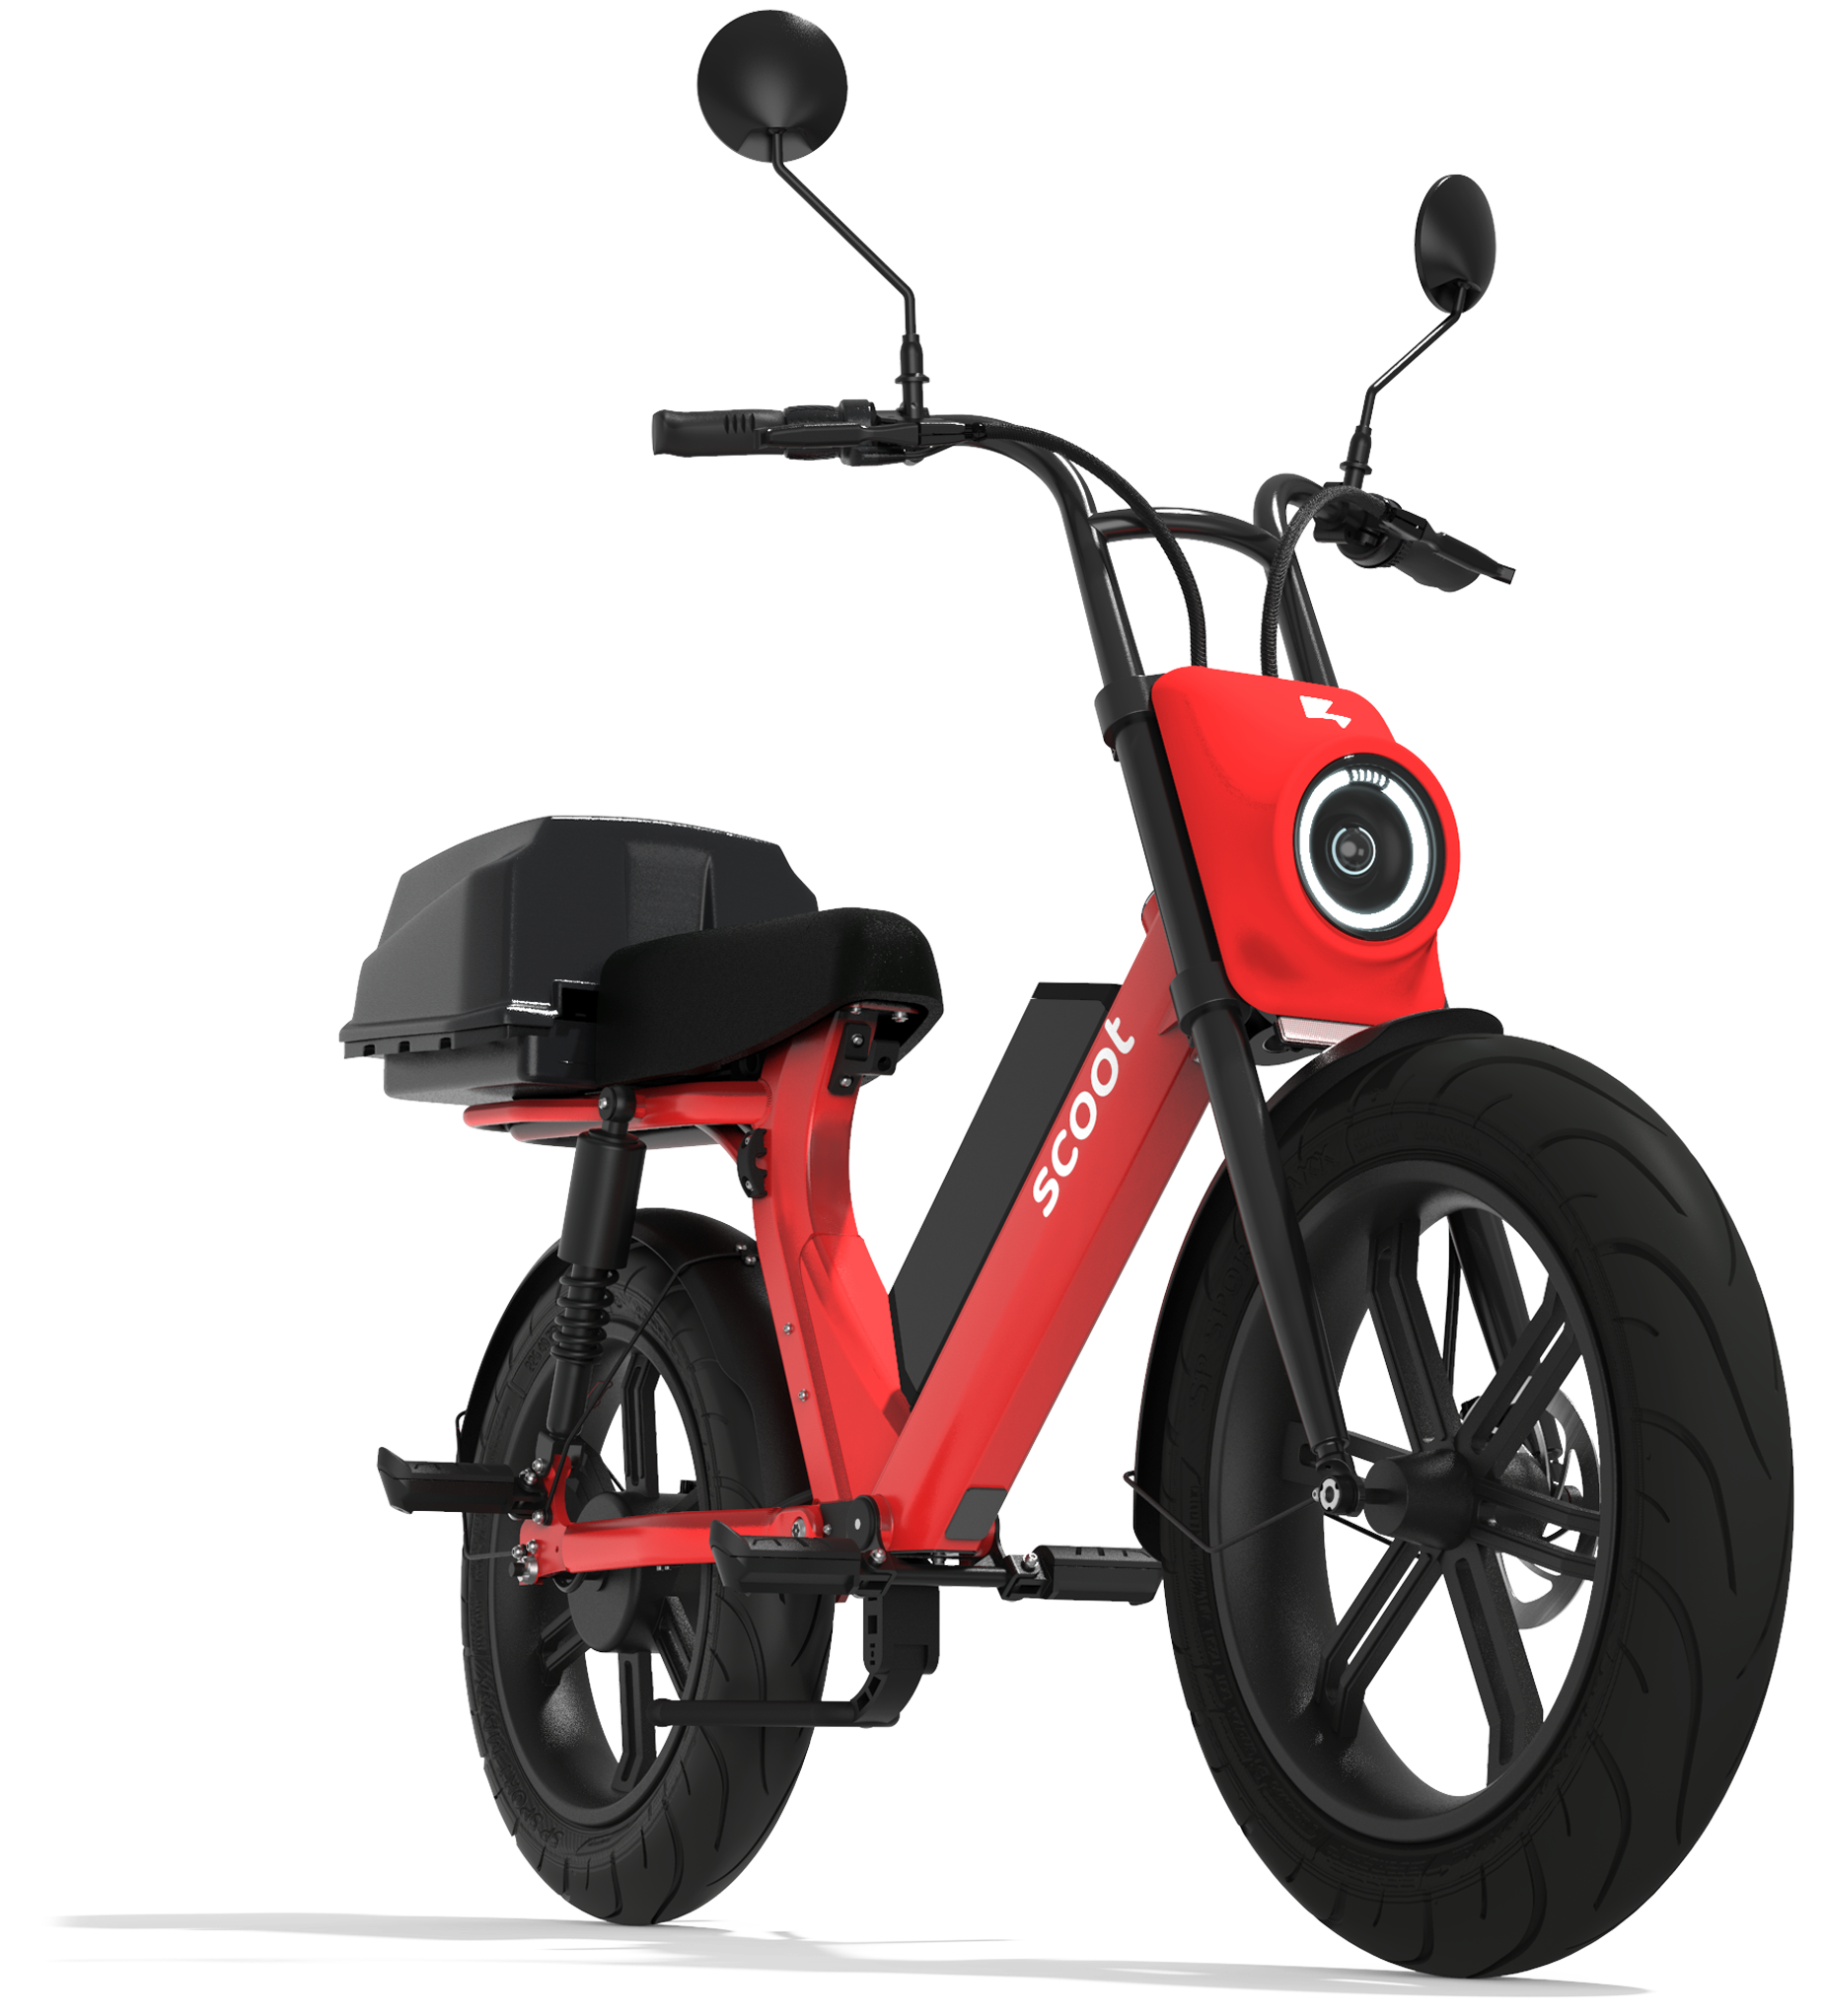 Scoot Moped unveiled by Bird as new seated electric scooter